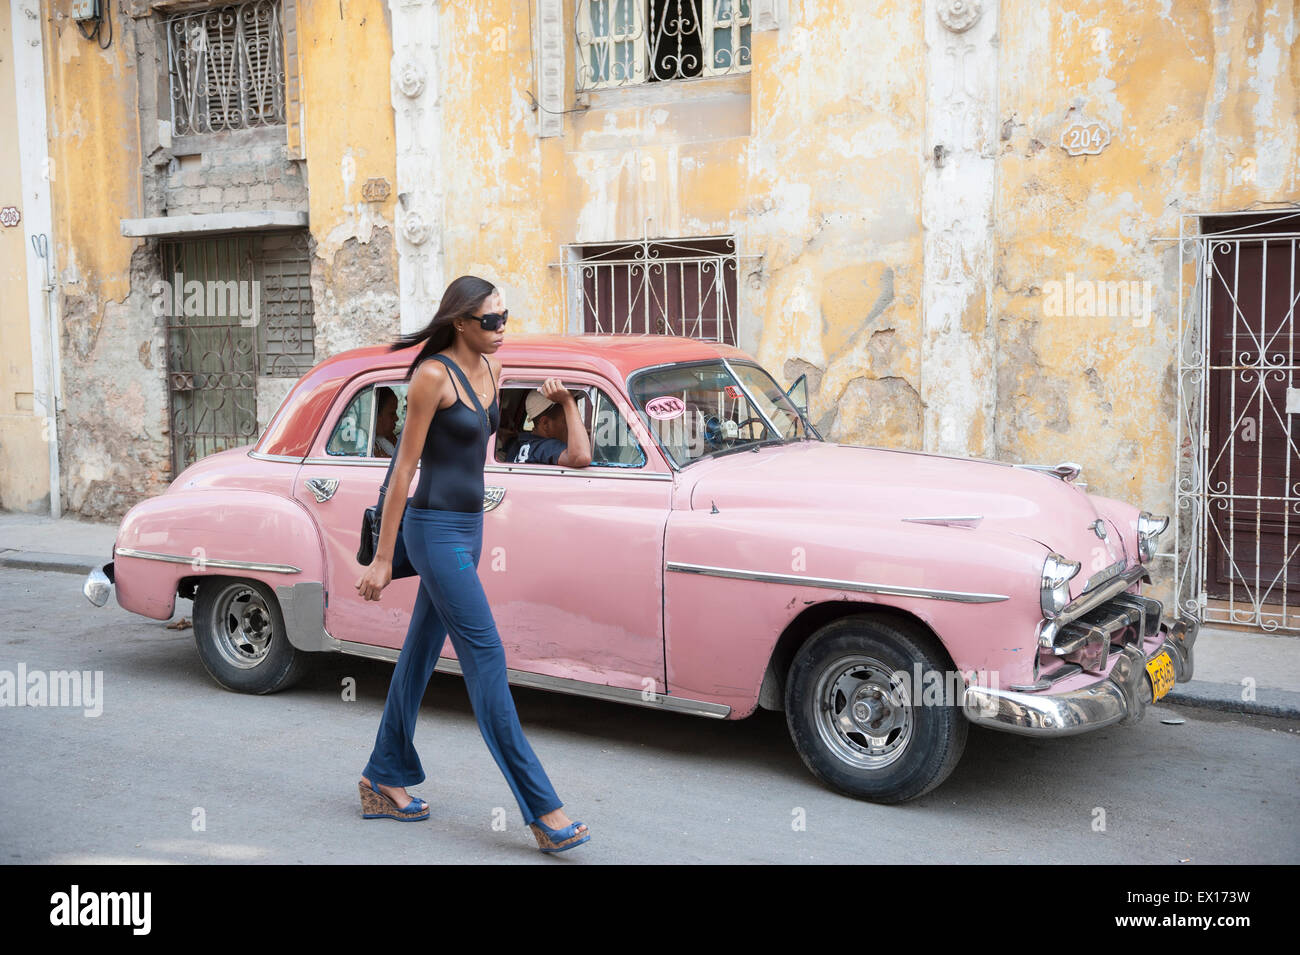 HAVANA, CUBA - JUNE 13, 2011: Young Cuban woman walks beside vintage American taxi car in front of weathered colonial buildings. Stock Photo